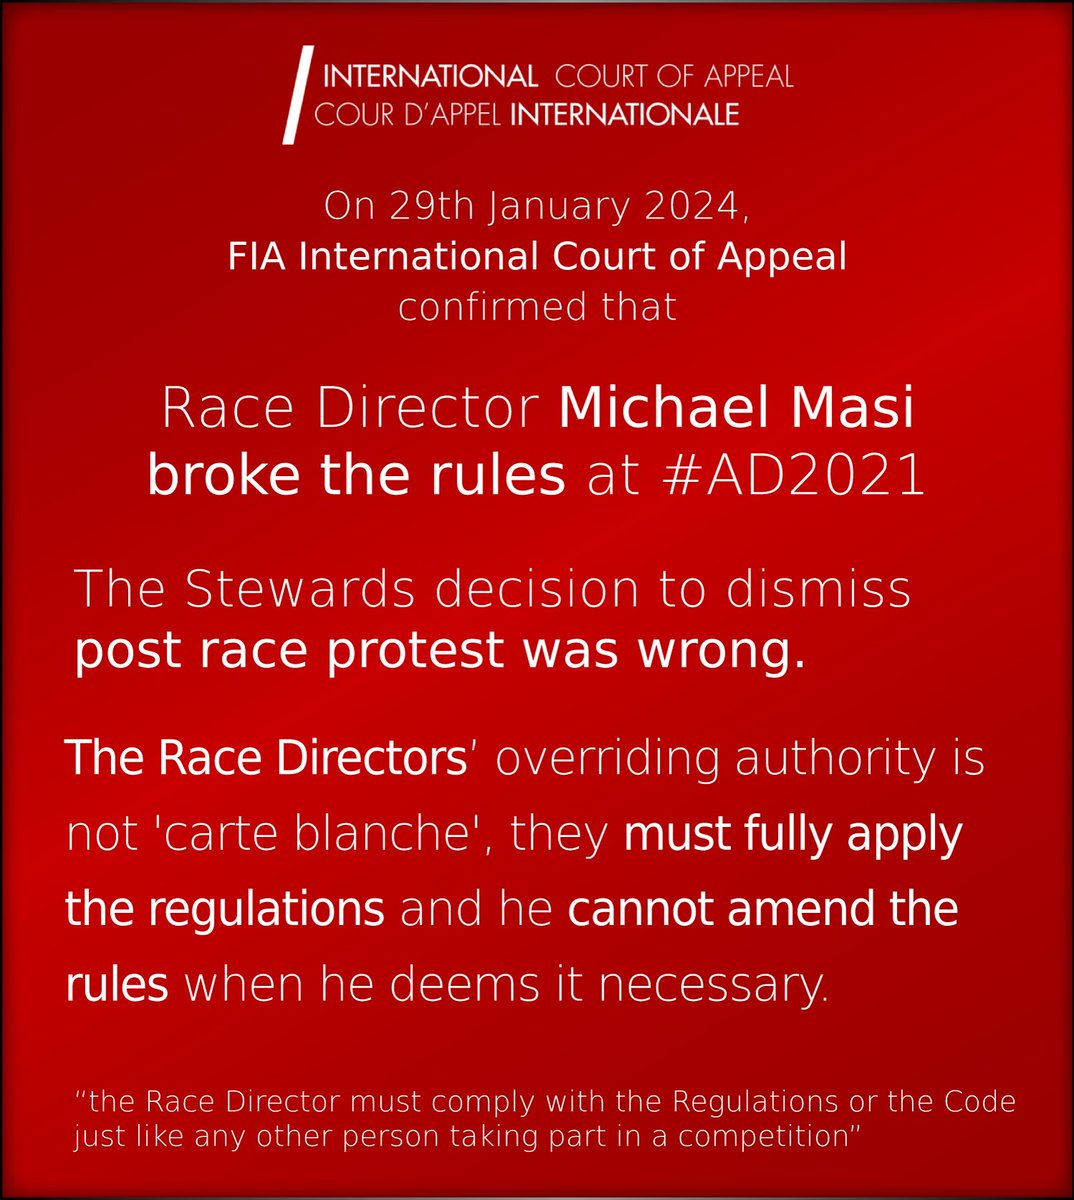 Dear #F1 fans On 29/1/24 the @fia ICA ruled on the 'overriding authority' granted to Race Directors. Their conclusion; it's not 'carte blanche', the RD must fully apply the regulations This ruling means the stewards decision at #AD2021 post race protest was WRONG #NoMoreBS #F1xed